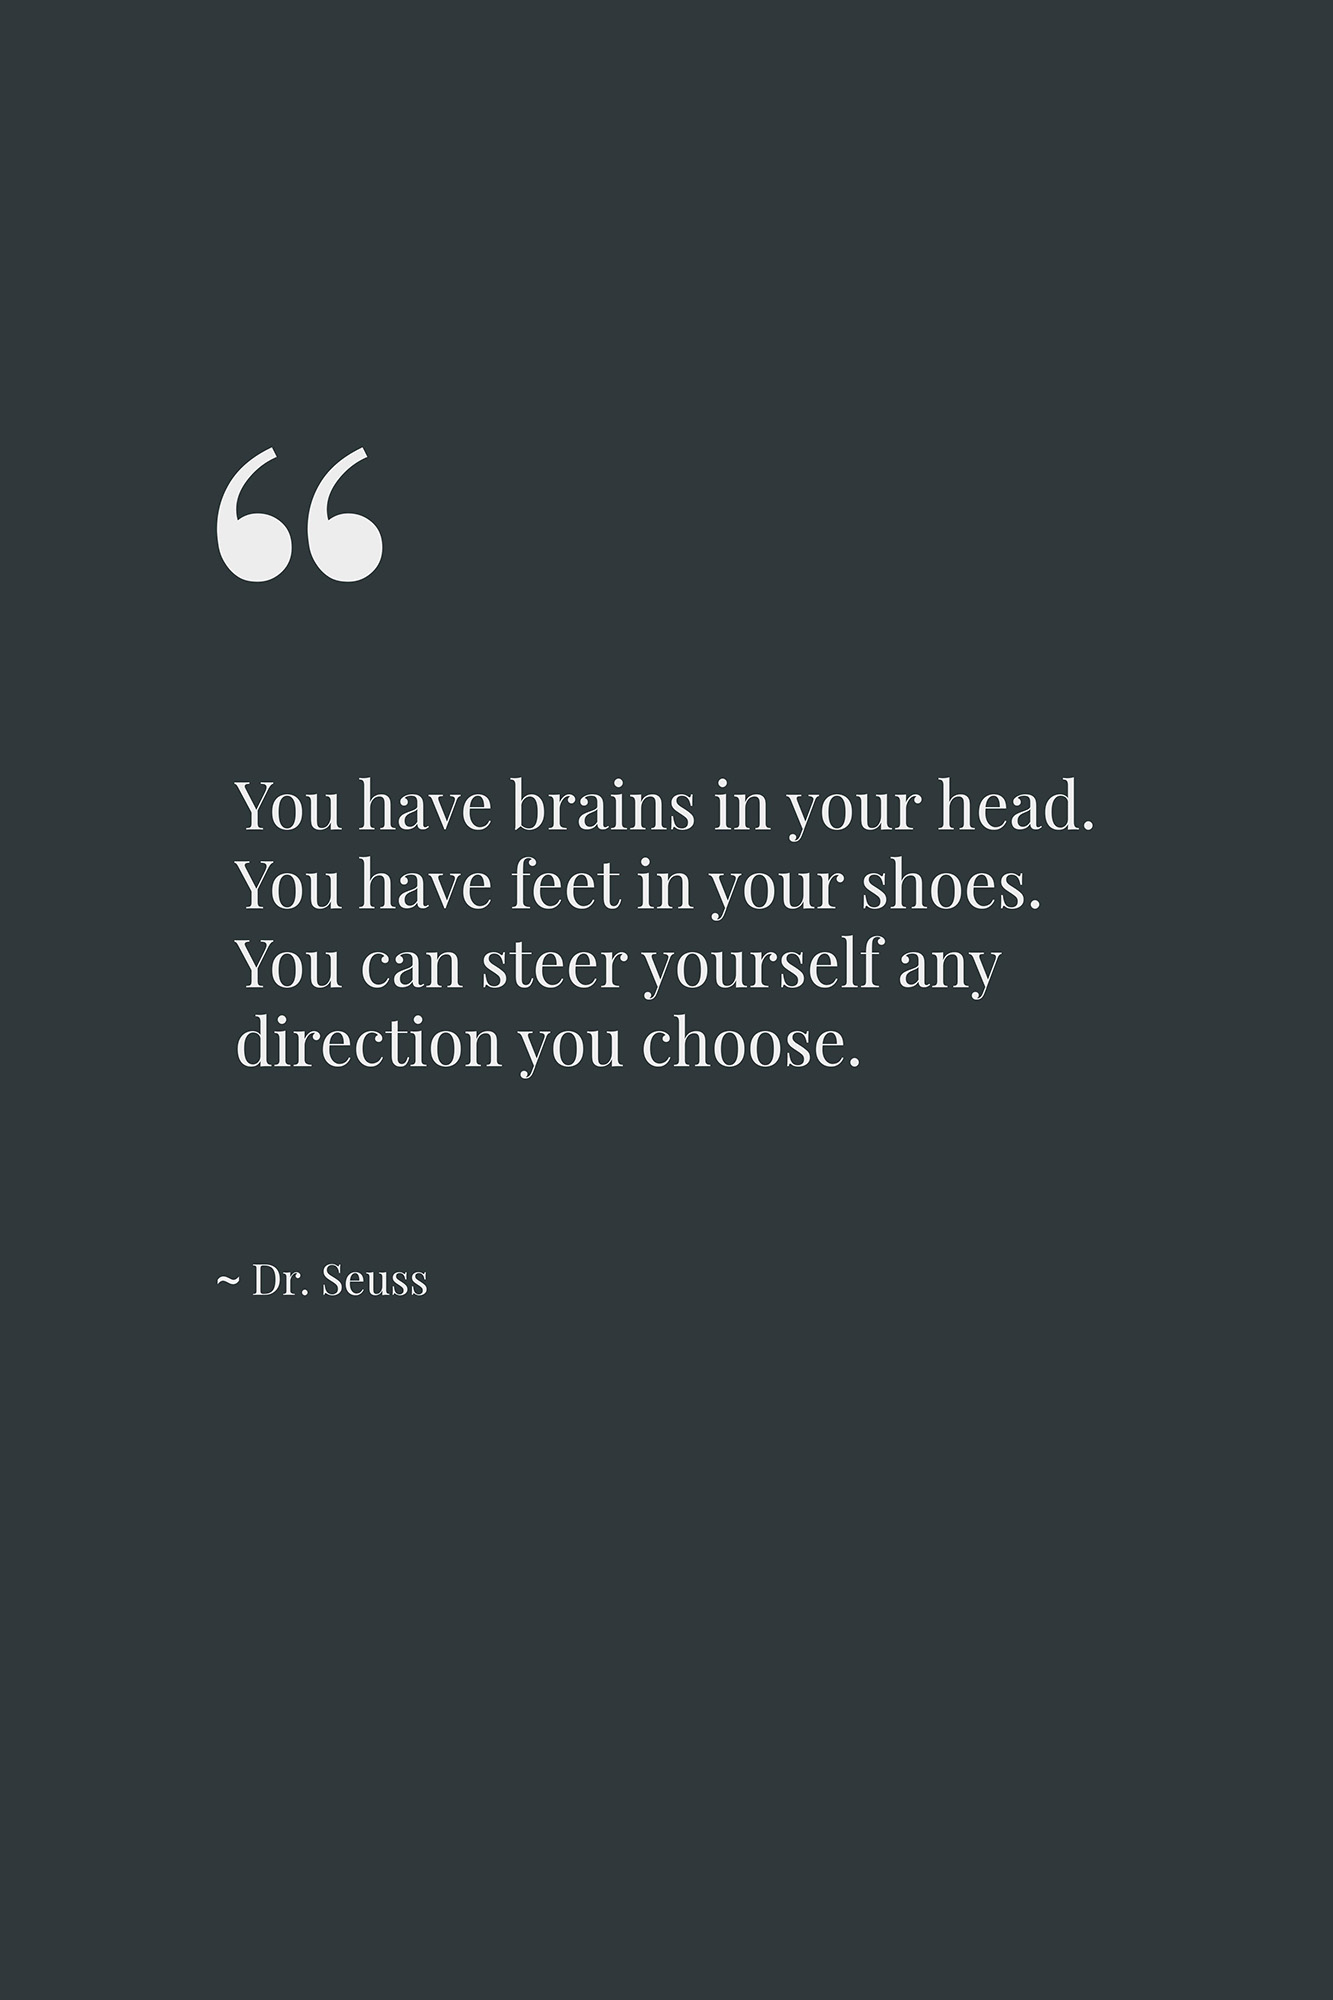 You have brains in your head. You have feet in your shoes. You can steer yourself any direction you choose. ~ Dr. Seuss